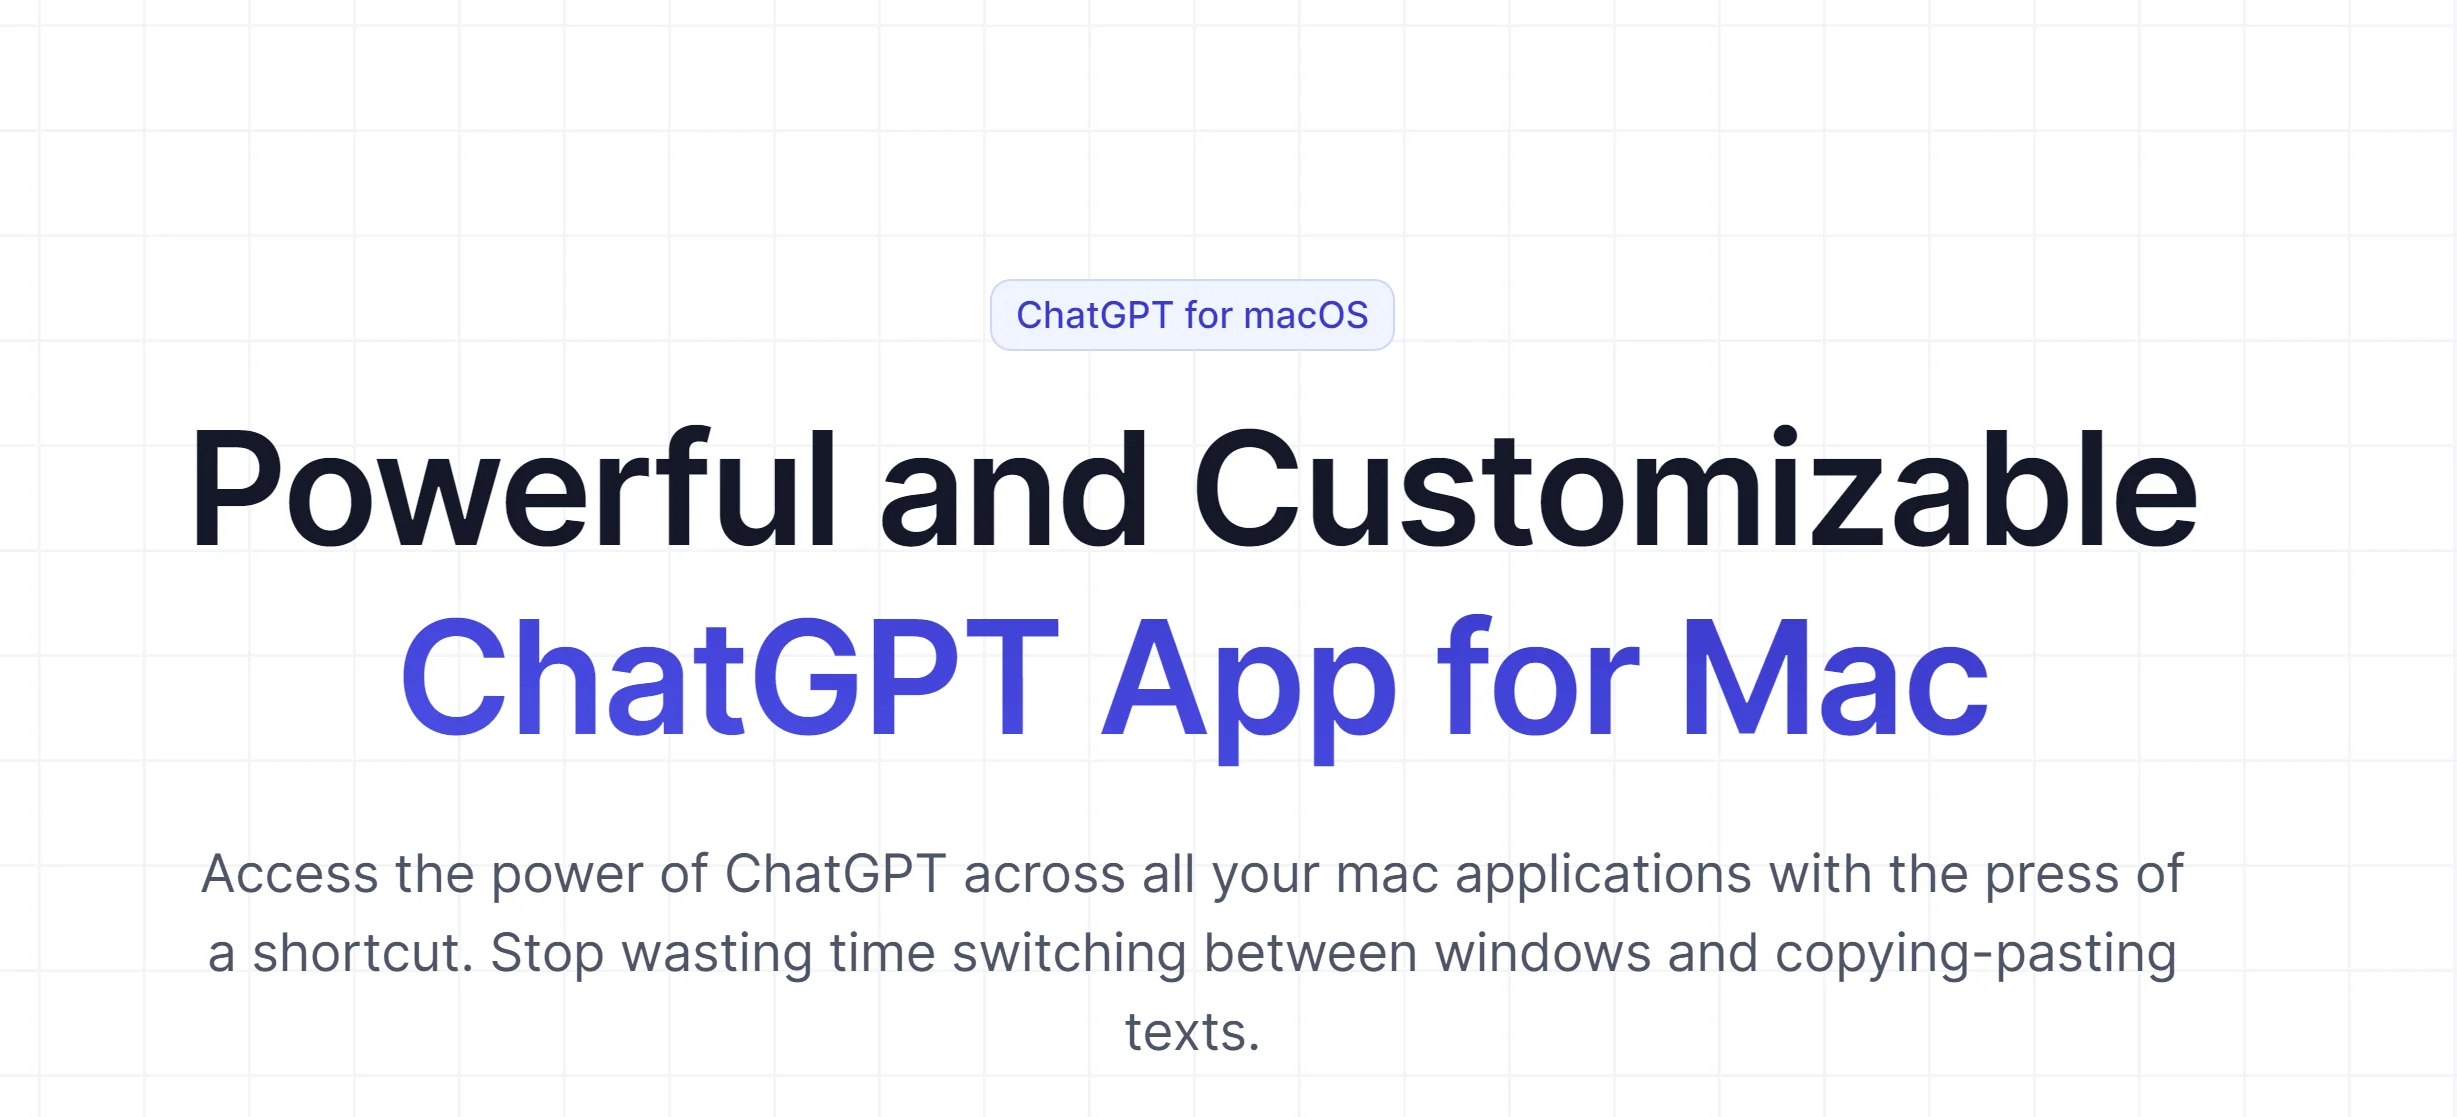 Powerful and Customizable ChatGPT App for Mac